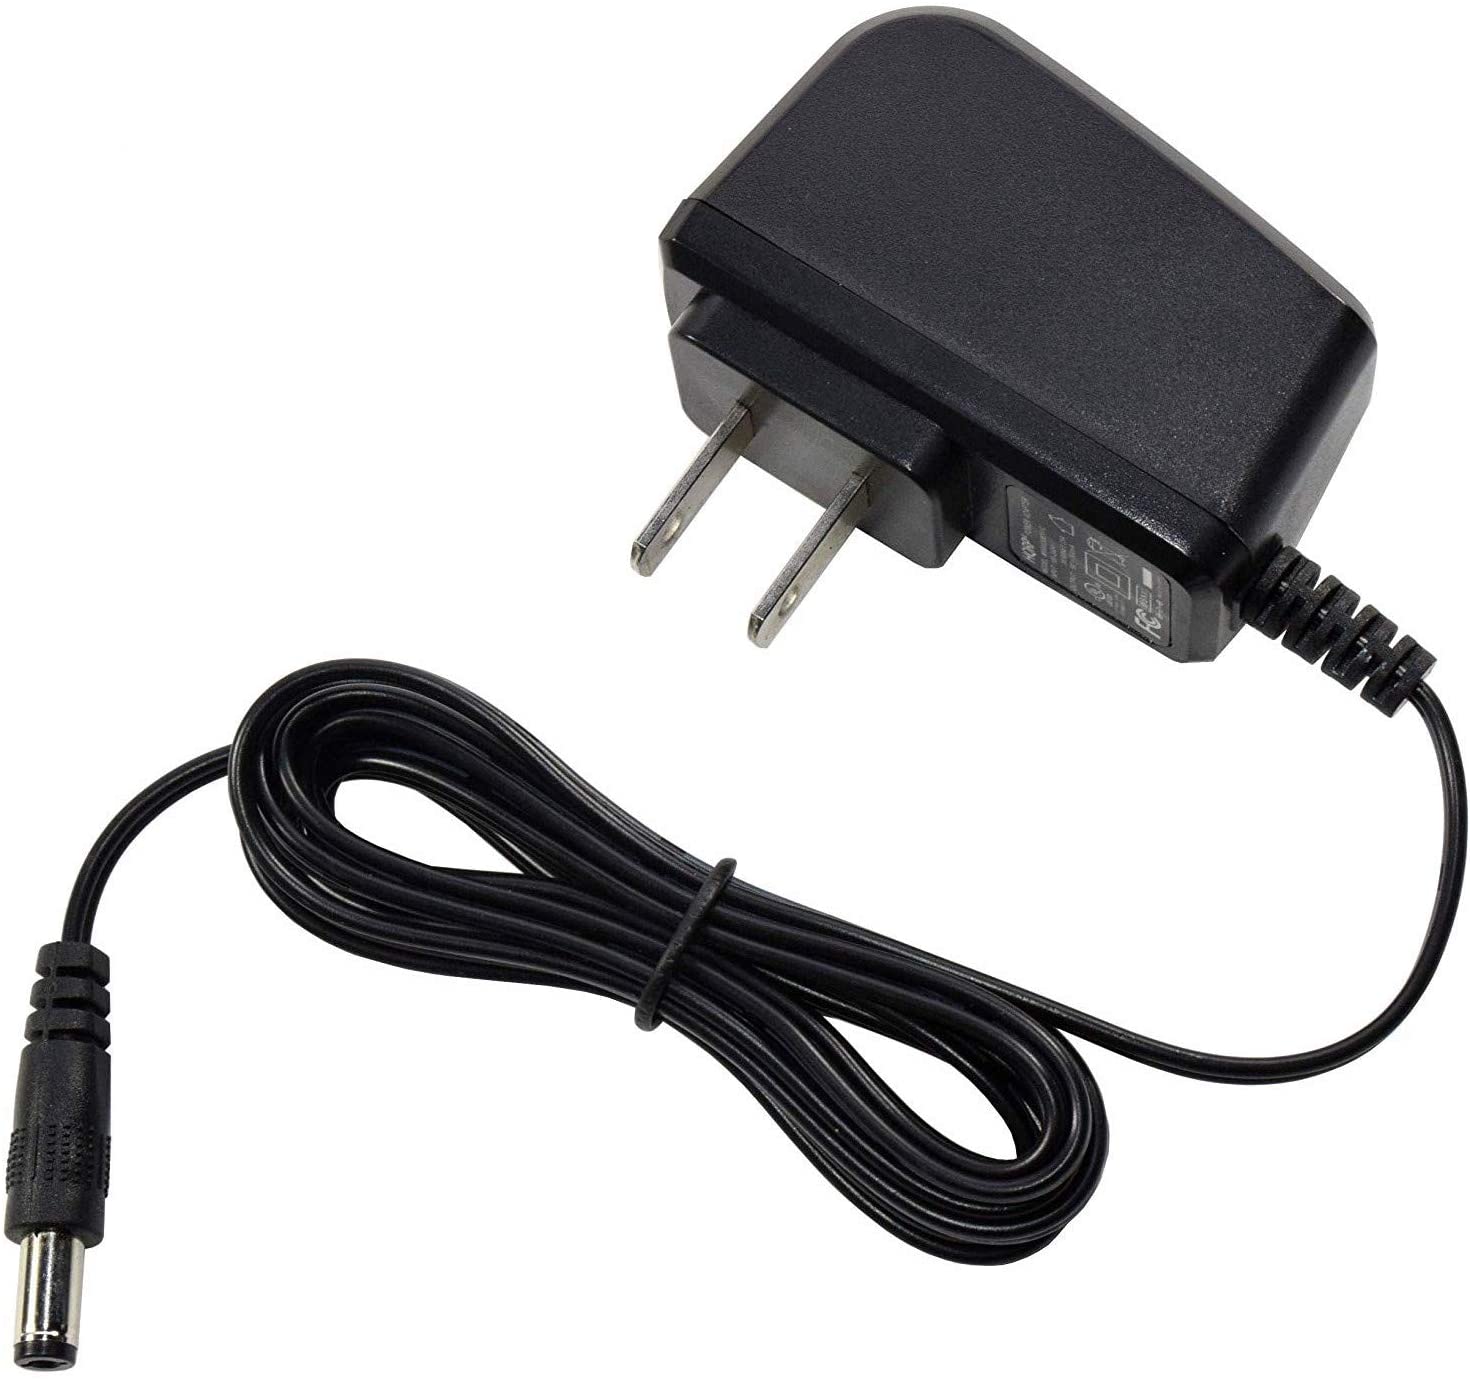 HQRP AC Adapter / Power Supply compatible with Tech 21 BASS DRIVER DI / BASS DRIVER PROGRAMMABLE Guitar Effects pedals